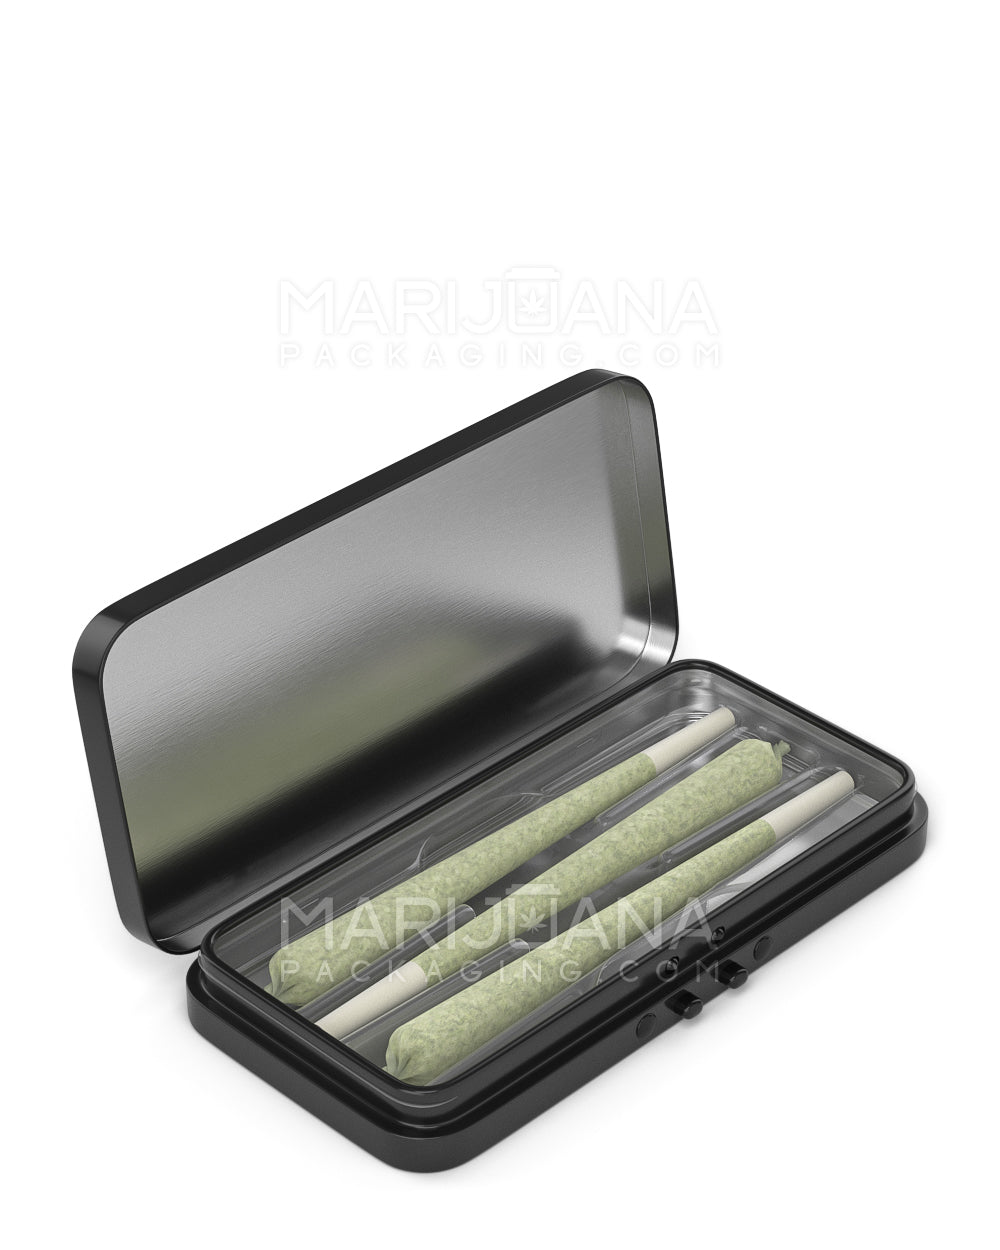 Edible & Joint Box Insert Tray for 3 King Size Pre Rolled Cones | 109mm - Clear Plastic - 100 Count - 8